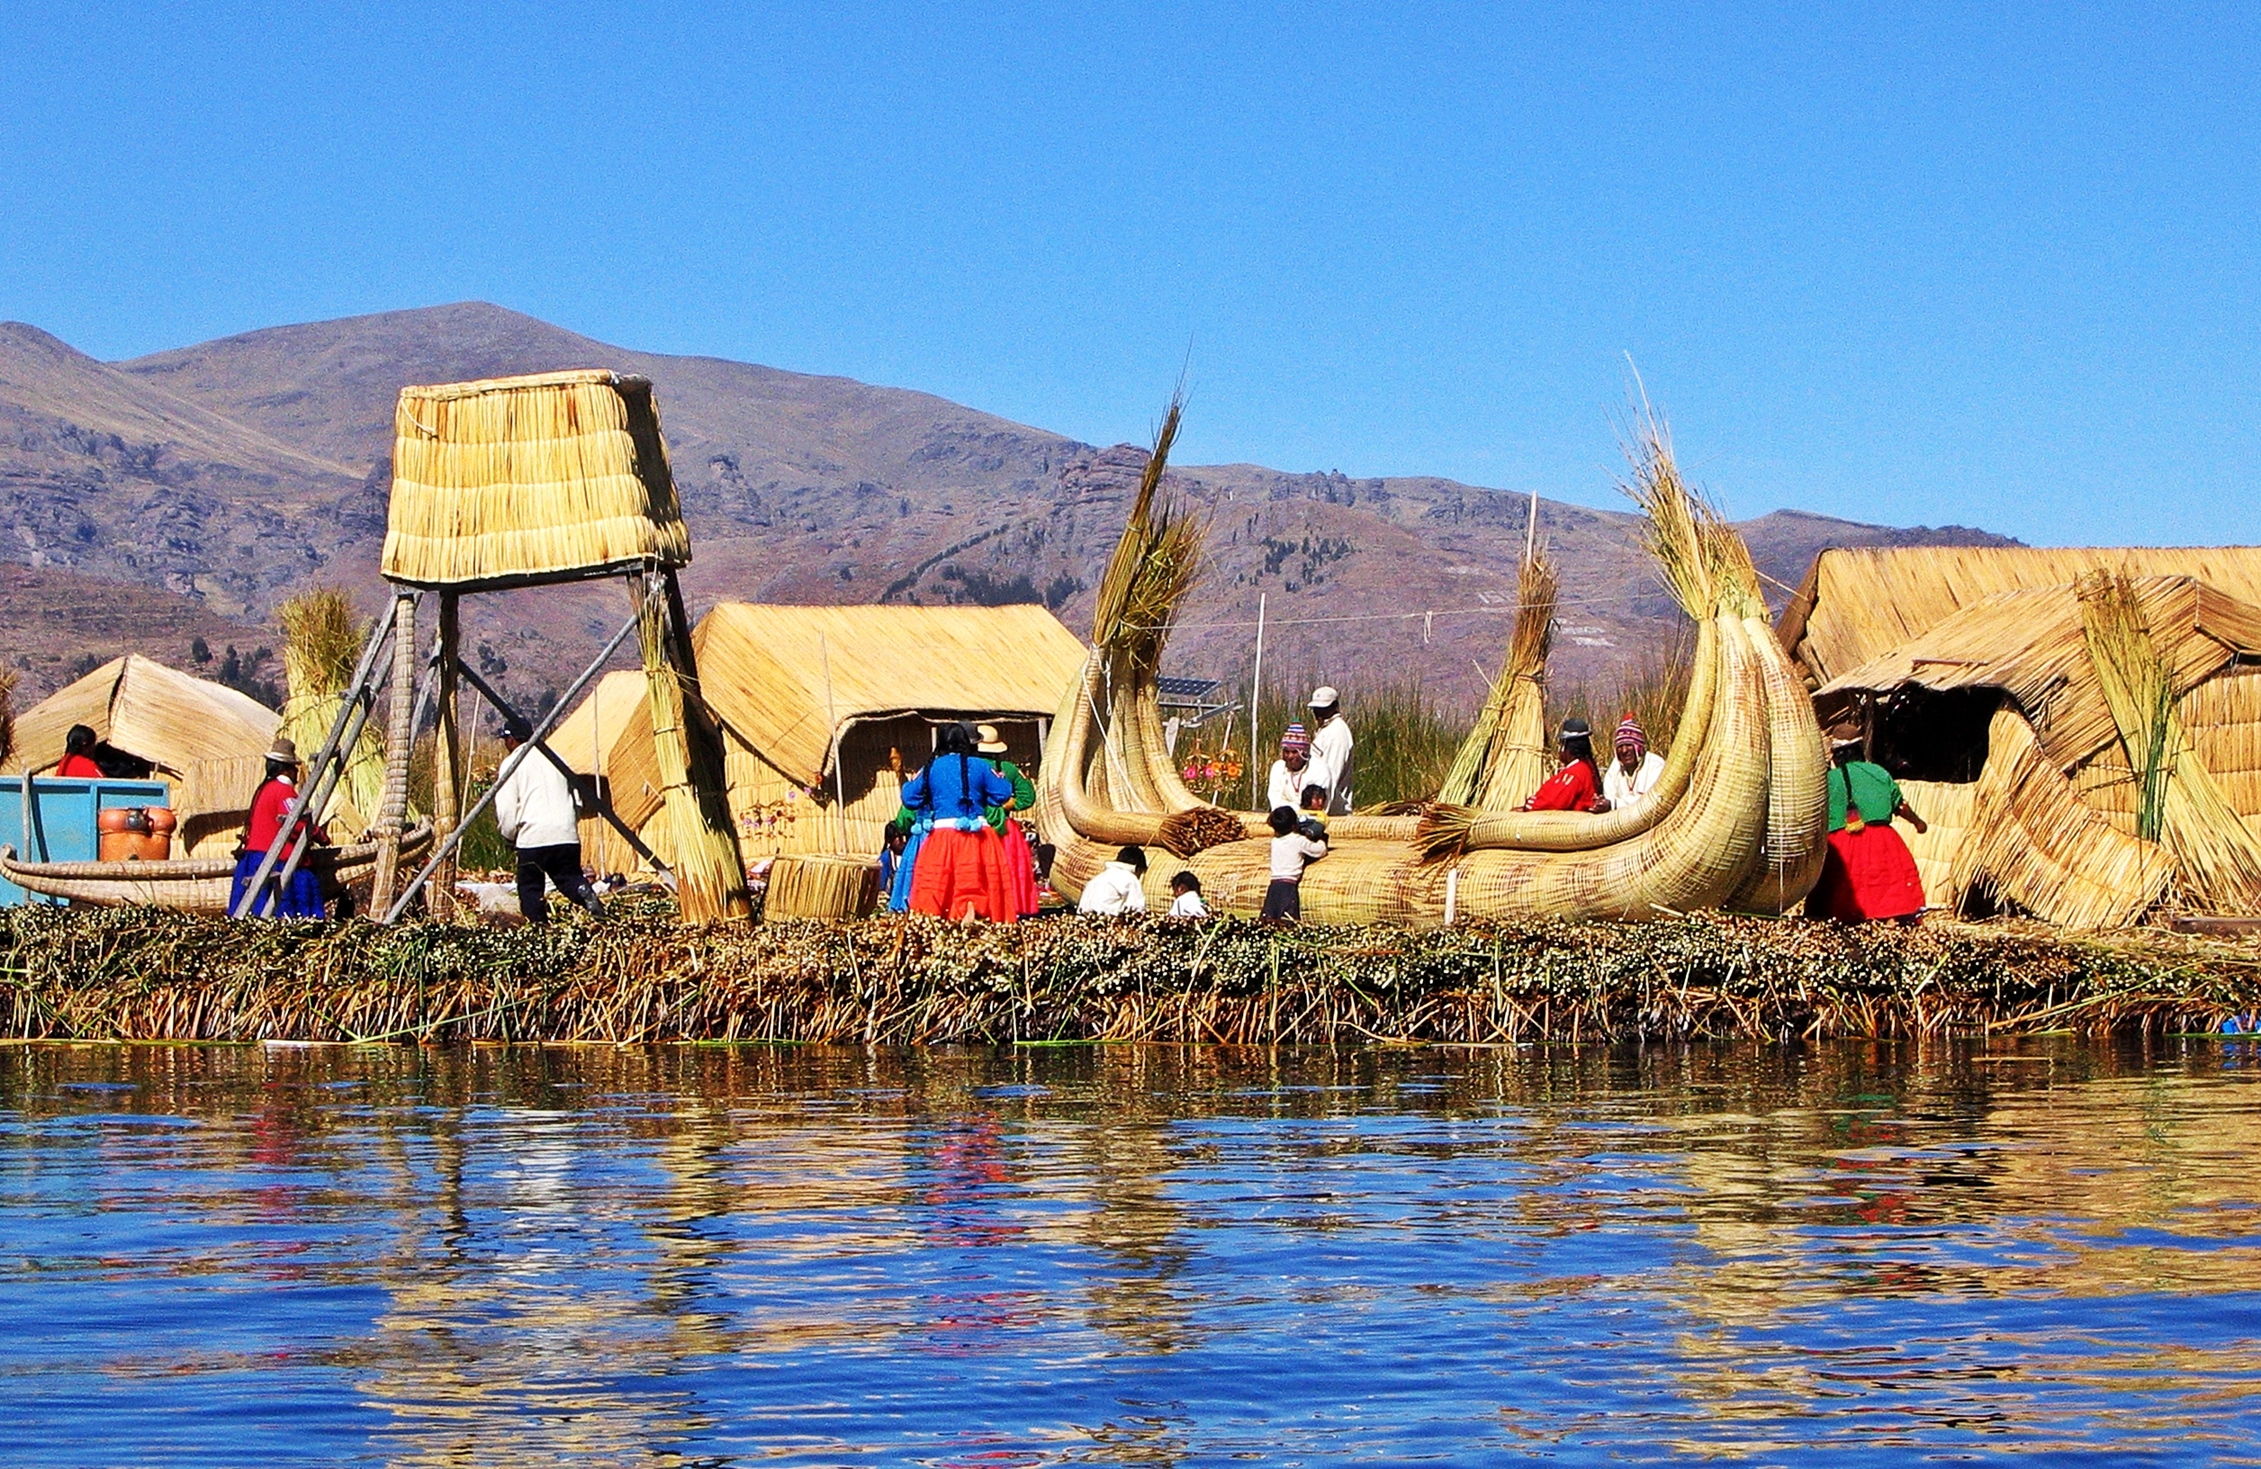 Floating reed village and boats, Lake Titicaca